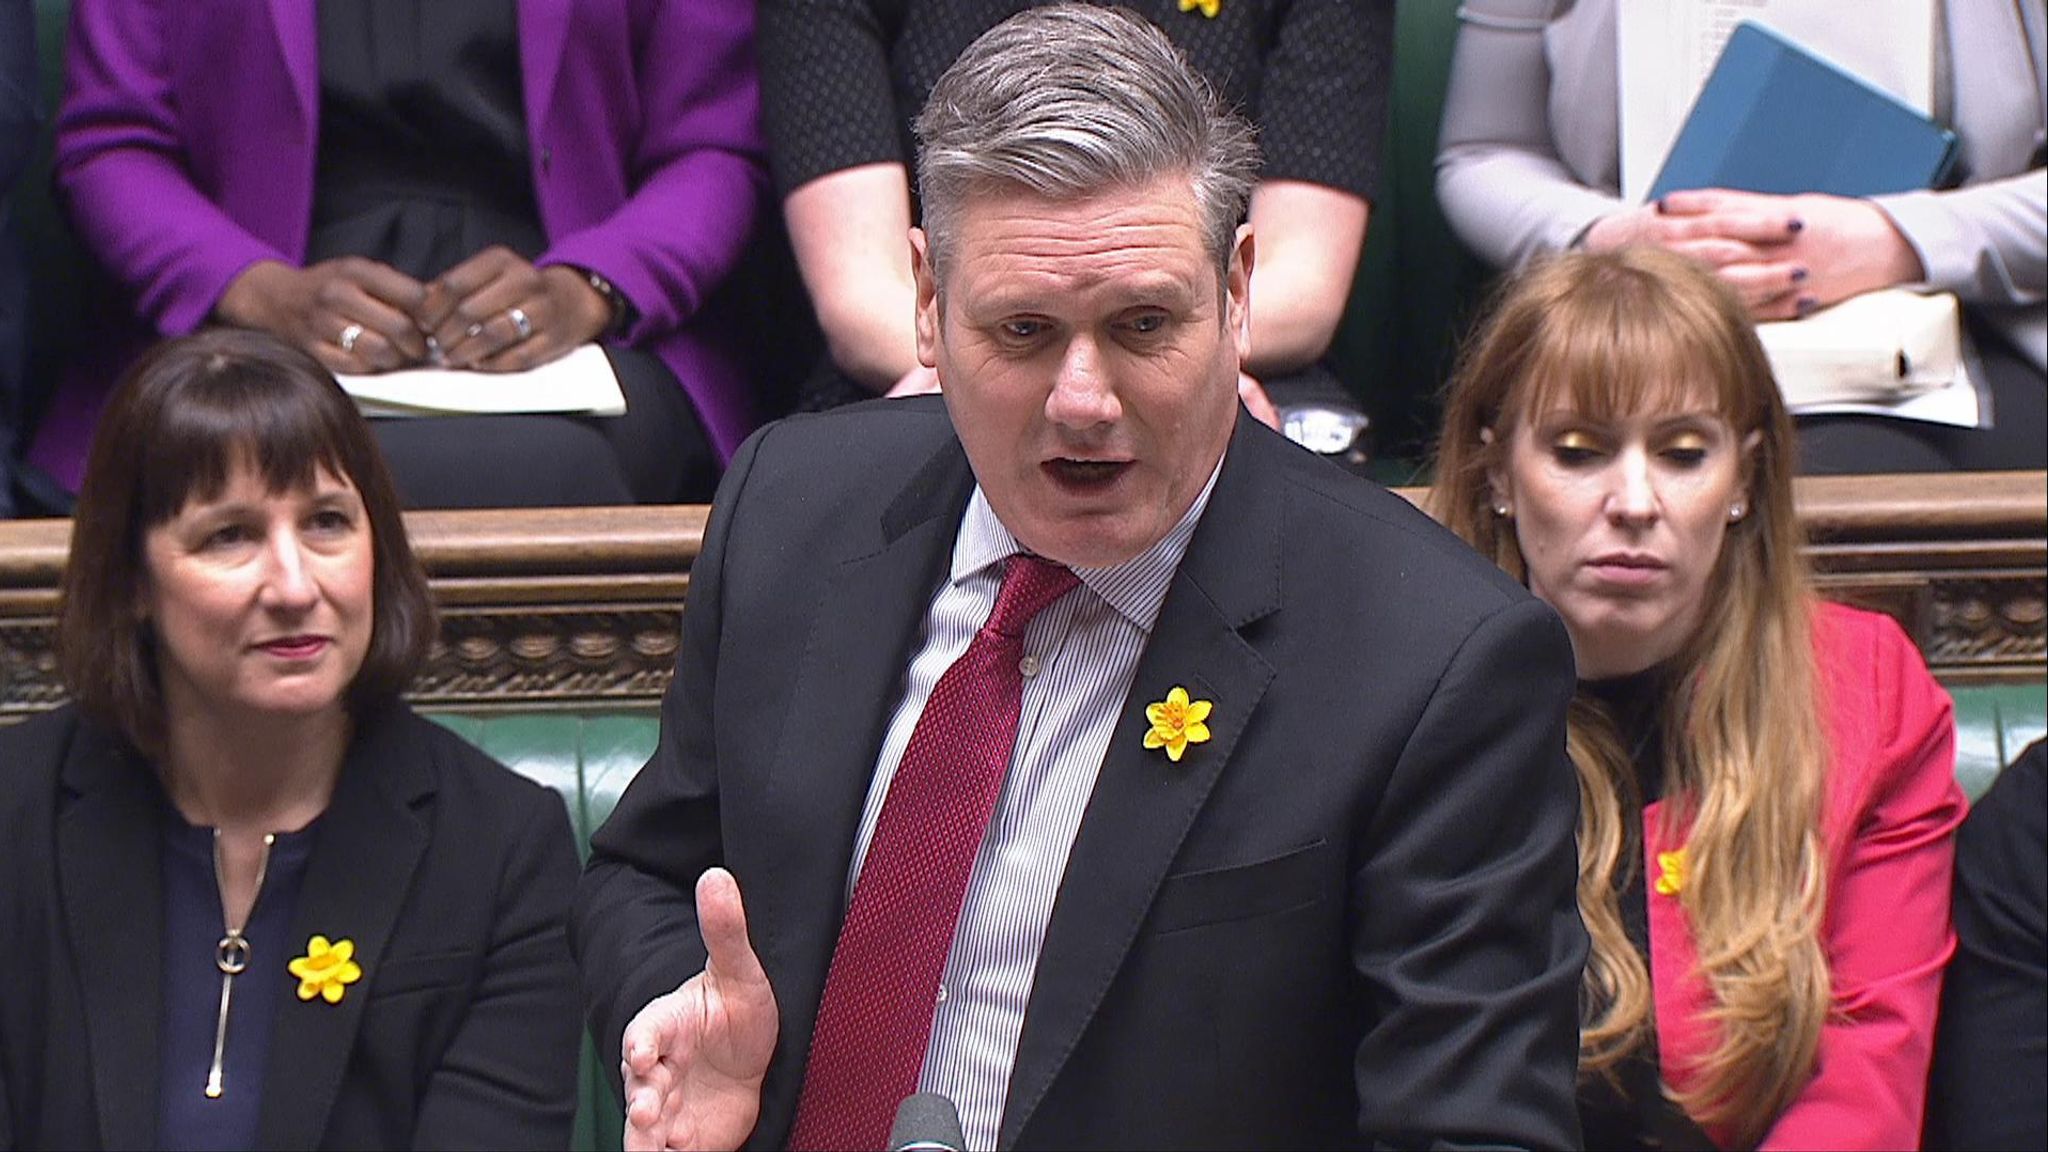 PMQs review: Sir Keir Starmer mocks Tories at PMQs over by-election losses